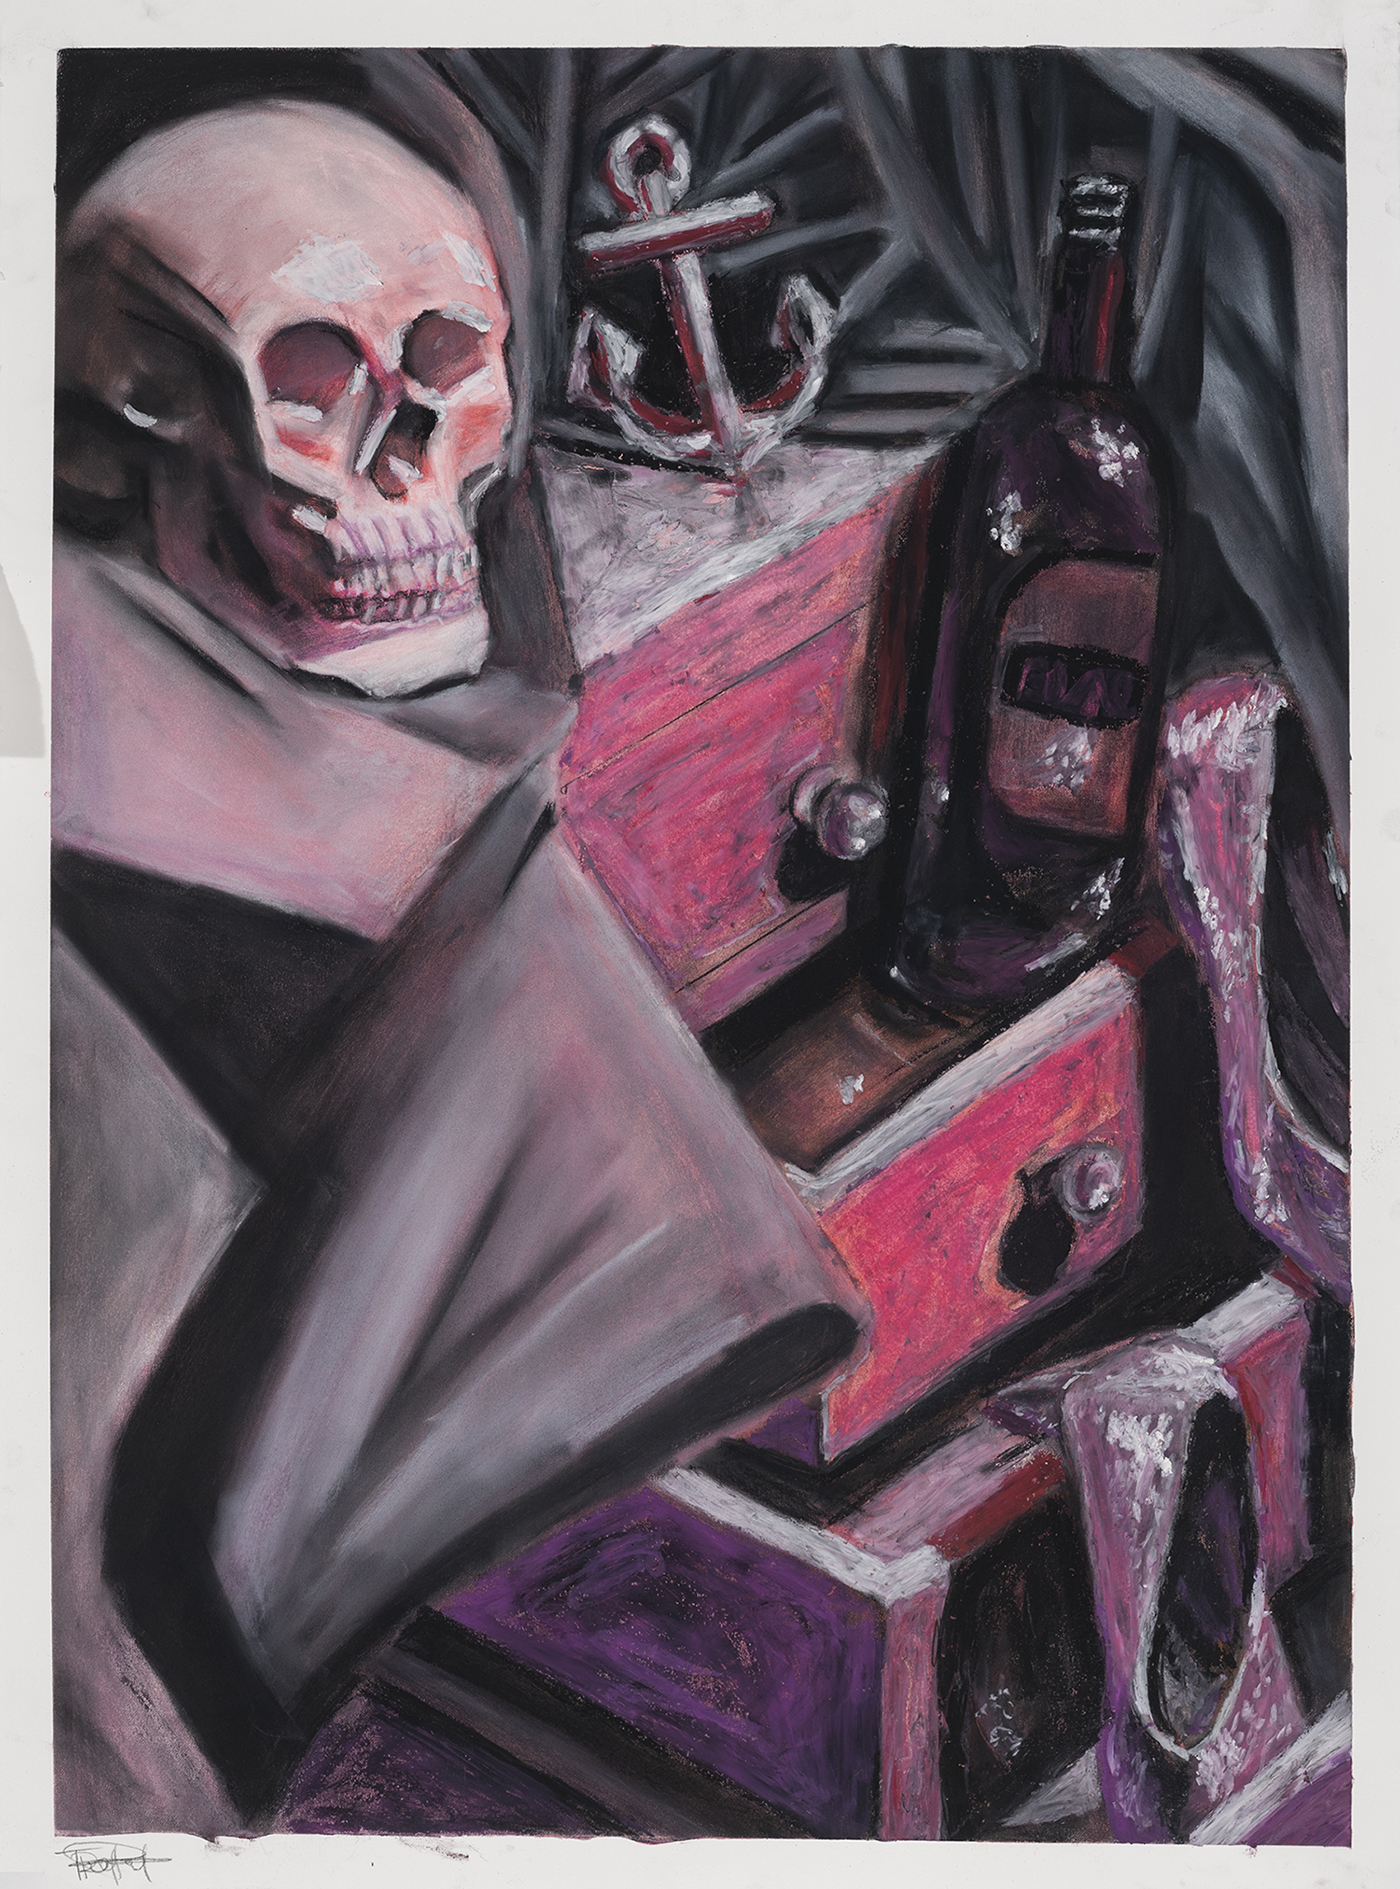 A still-life drawing of a skull, bottle, dresser and other objects.